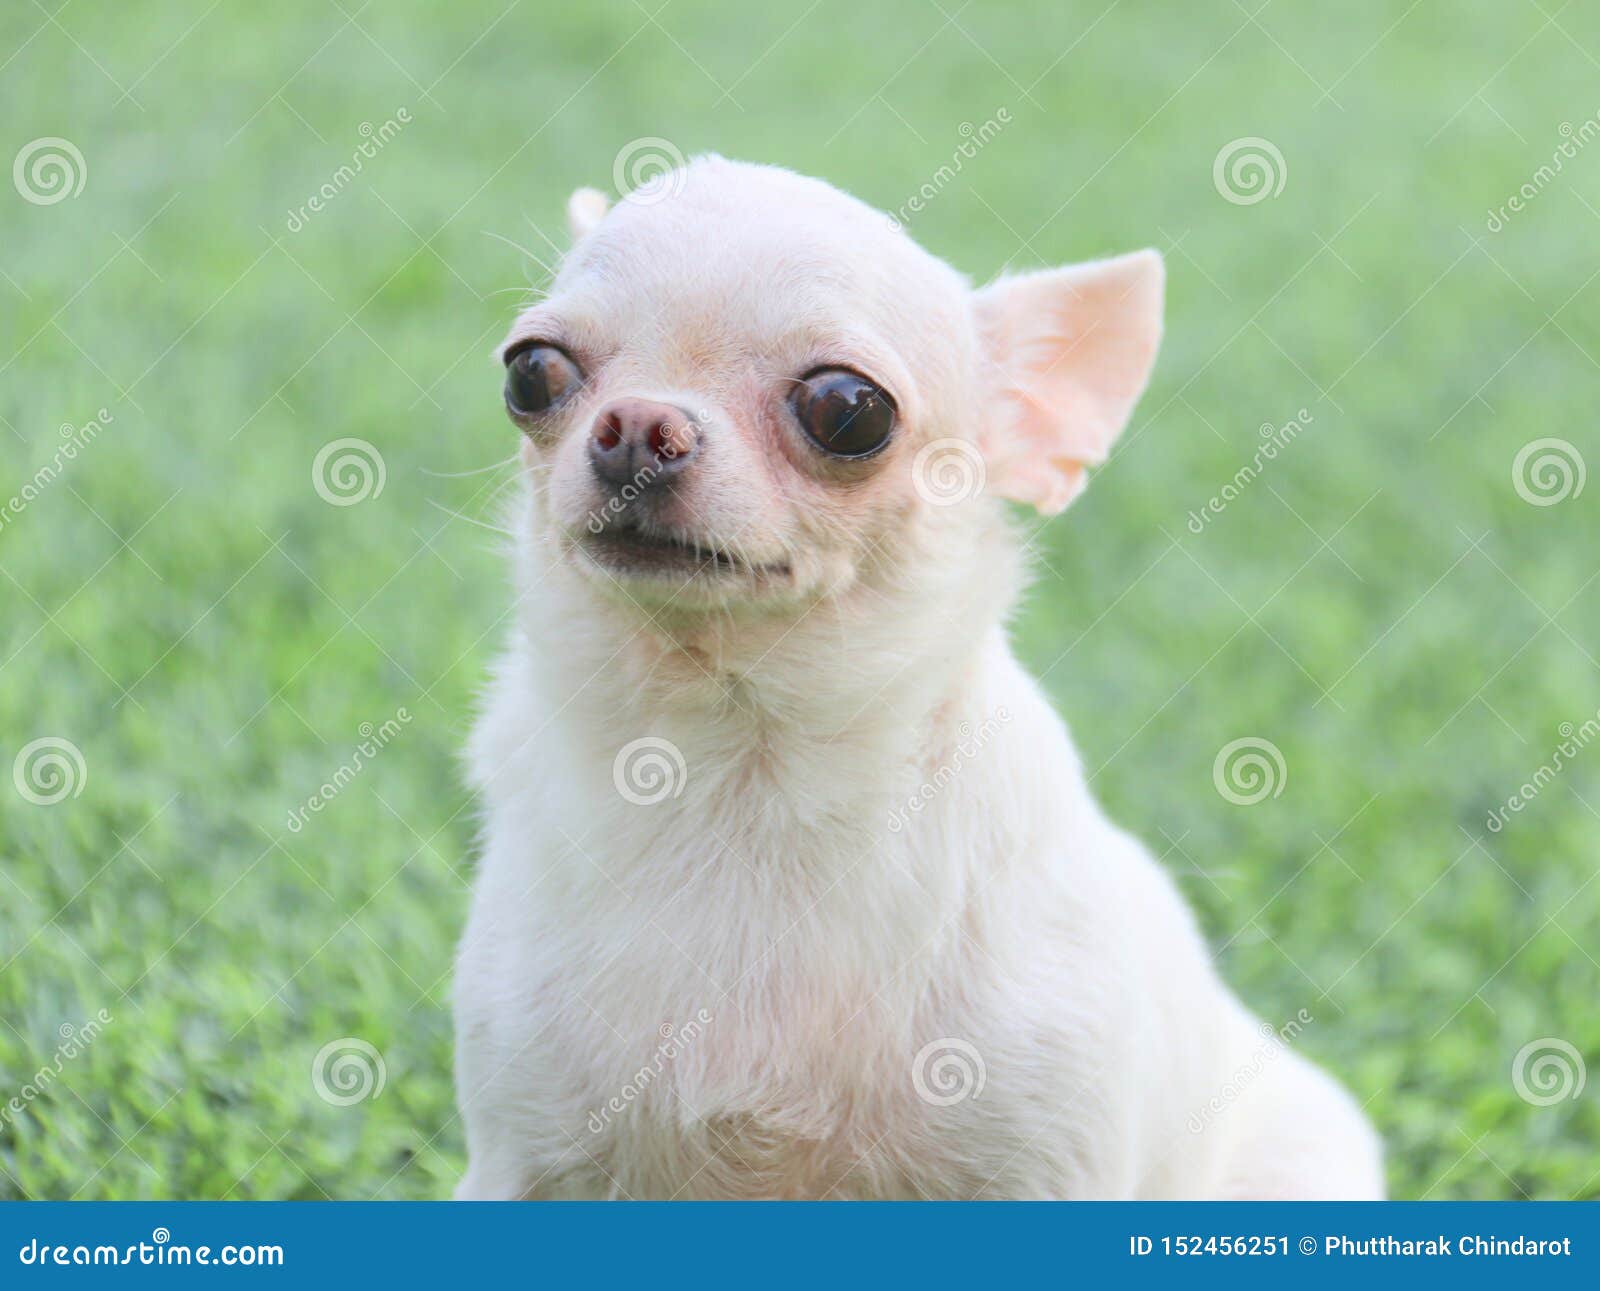 White Short Hair Chihuahua Dog Sit On The Green Grass